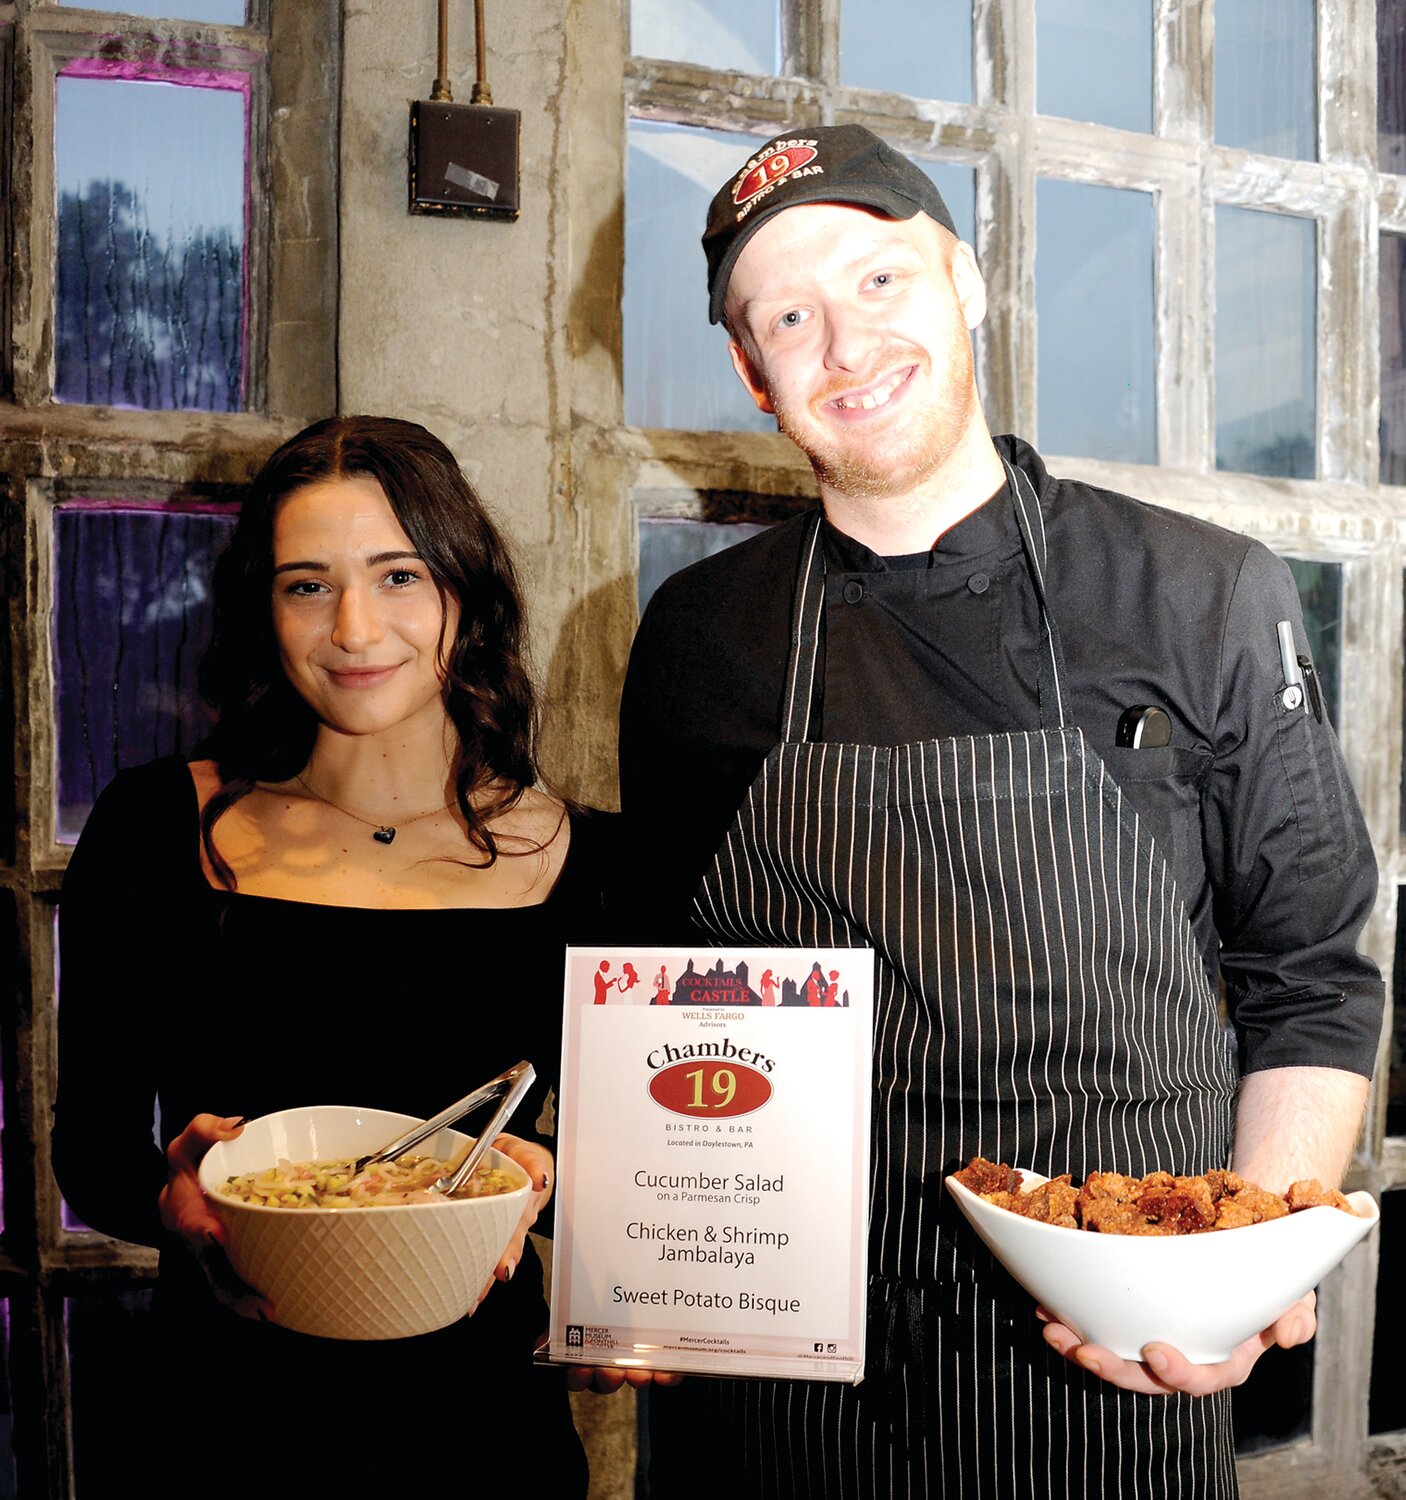 Allie Magas and Evan Armitage of Chambers 19 Bistro & Bar.